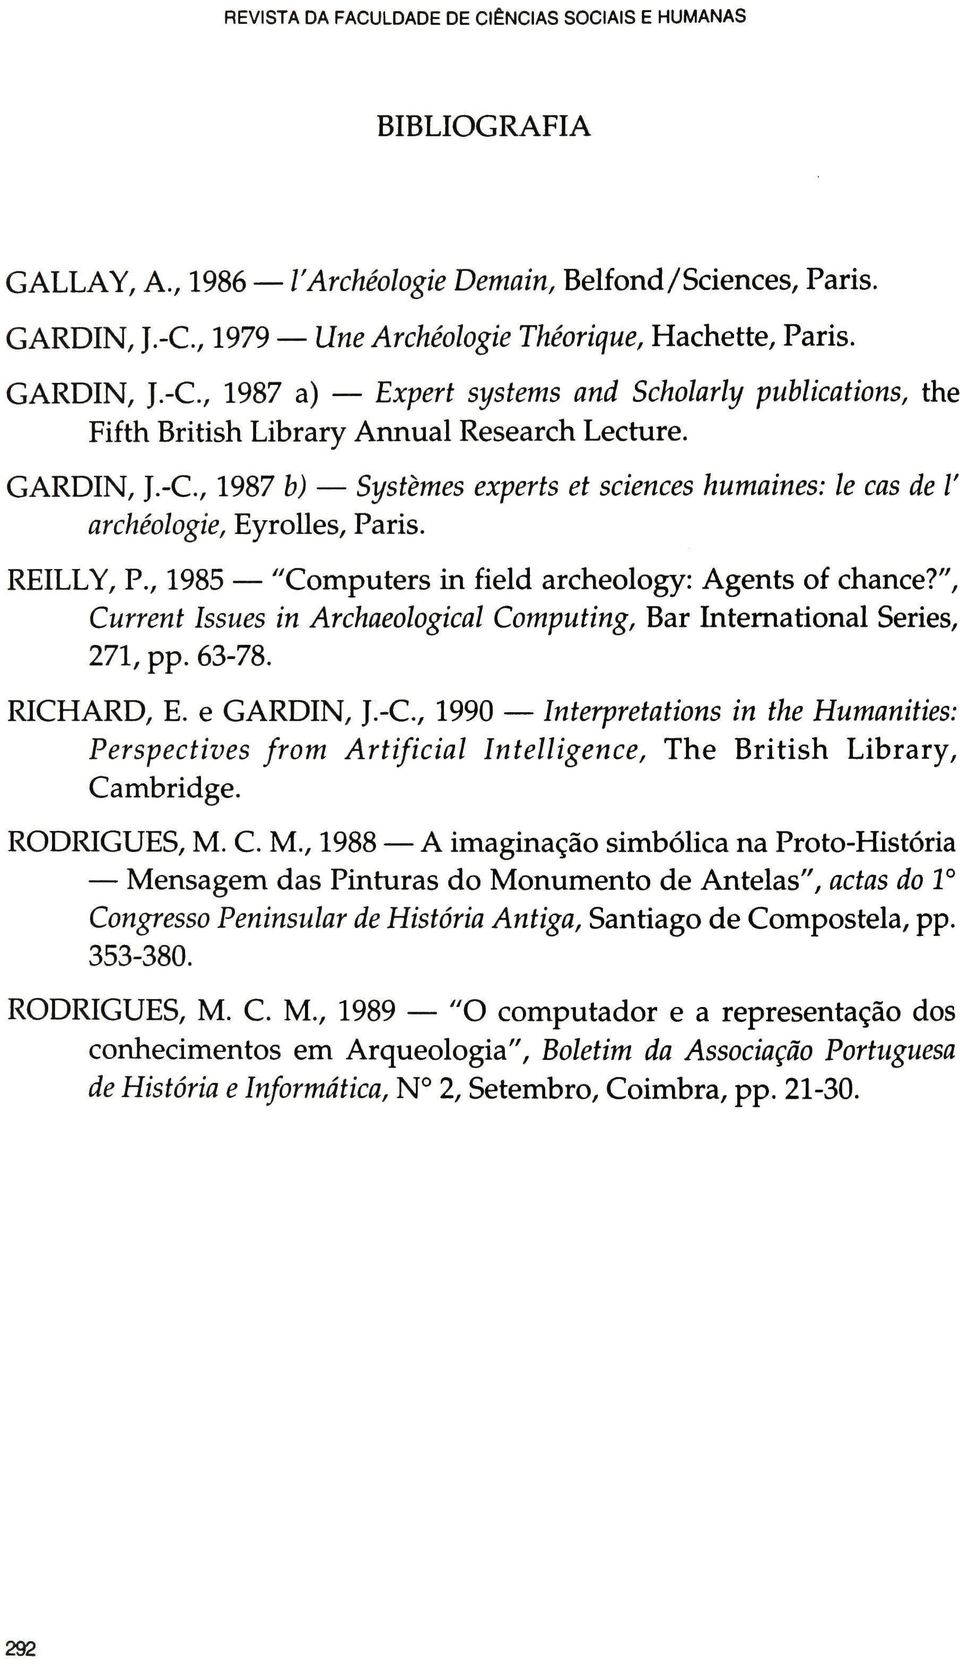 REILLY, P., 1985 "Computers üi field archeology: Agents of chance?", Current Issues in Archaeological Computing, Bar International Series, 271, pp. 63-78. RICHARD, E. e GARDIN, J.